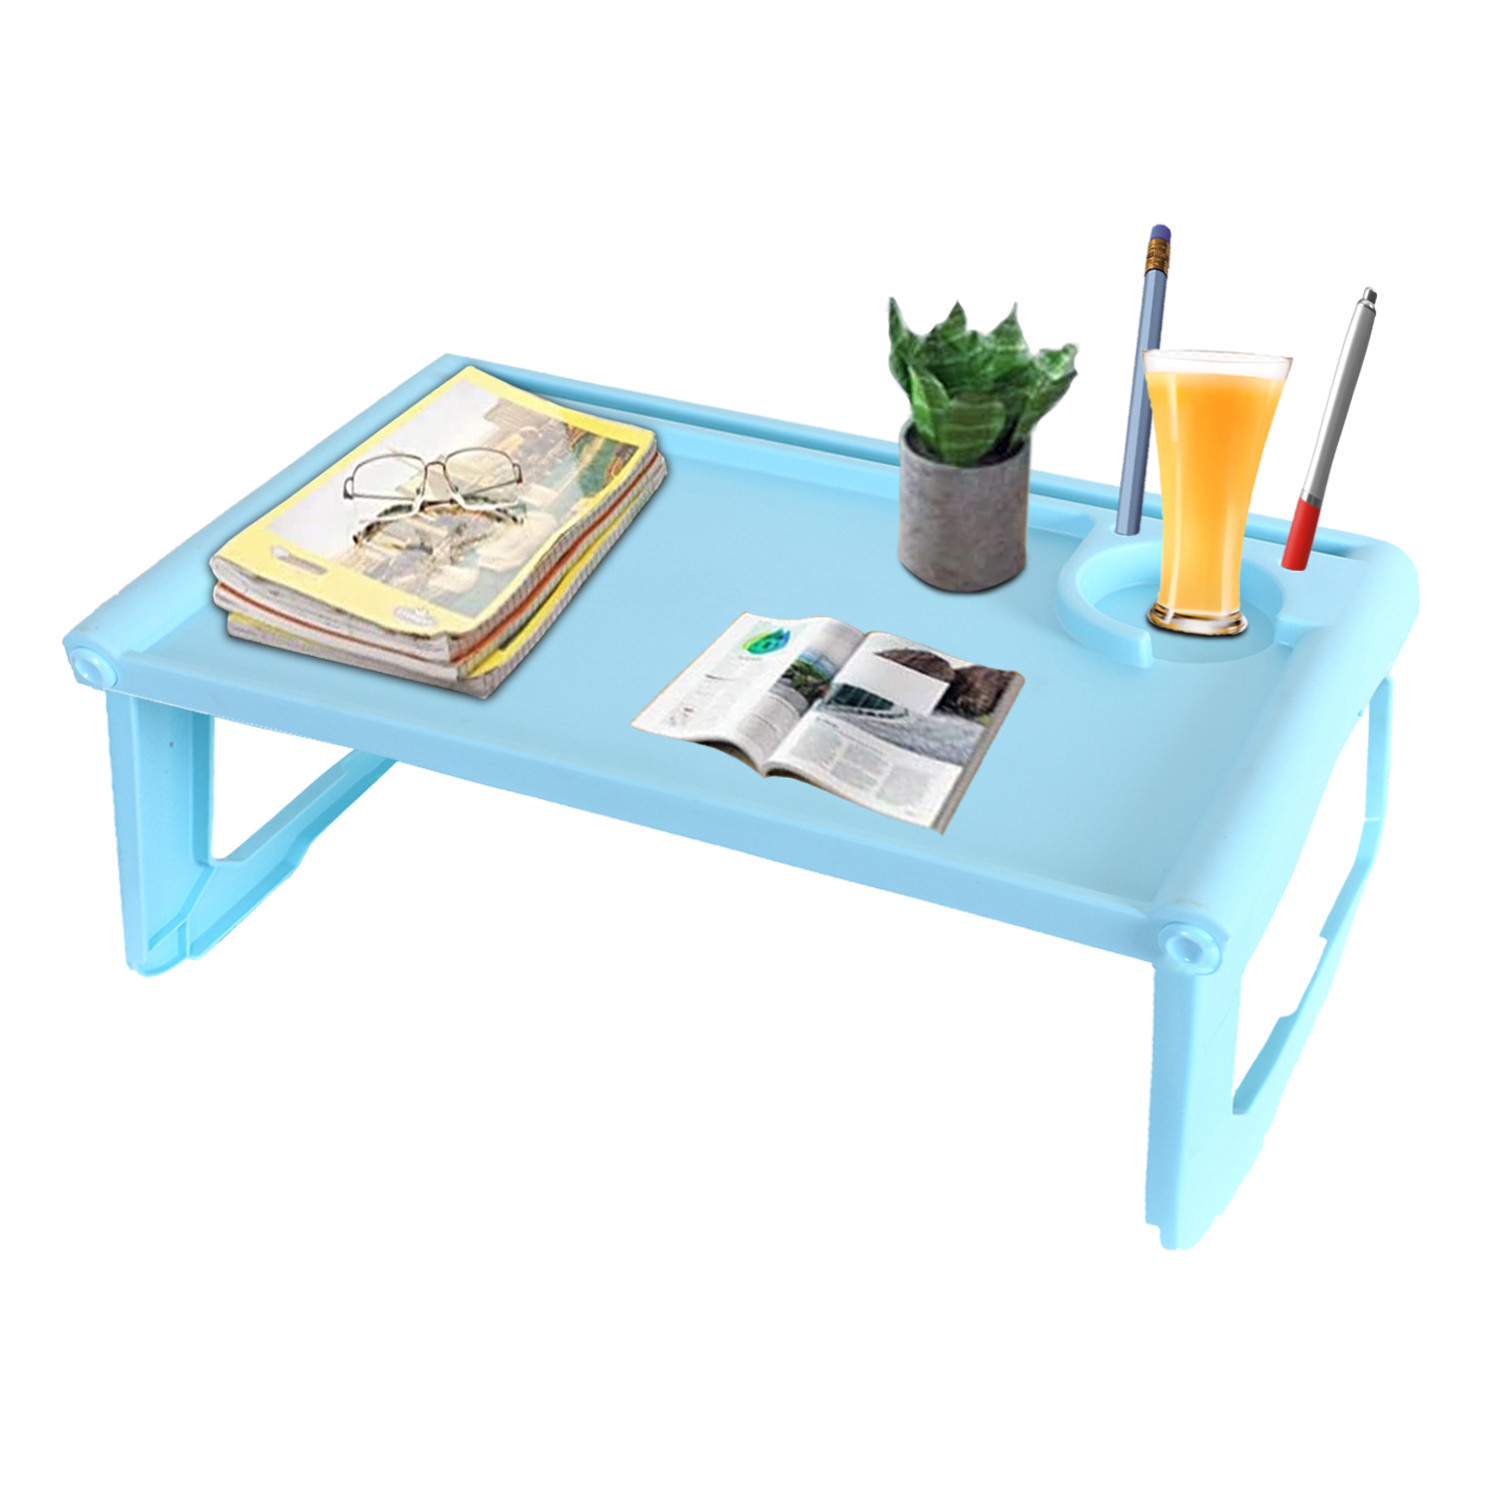 Kuber Industries Laptop Table with Cup Holder|Foldable Study Table|Mac Holder|Portable Plastic Breakfast Table|Desk for Bed & Non-Slip Legs (Mint Green)